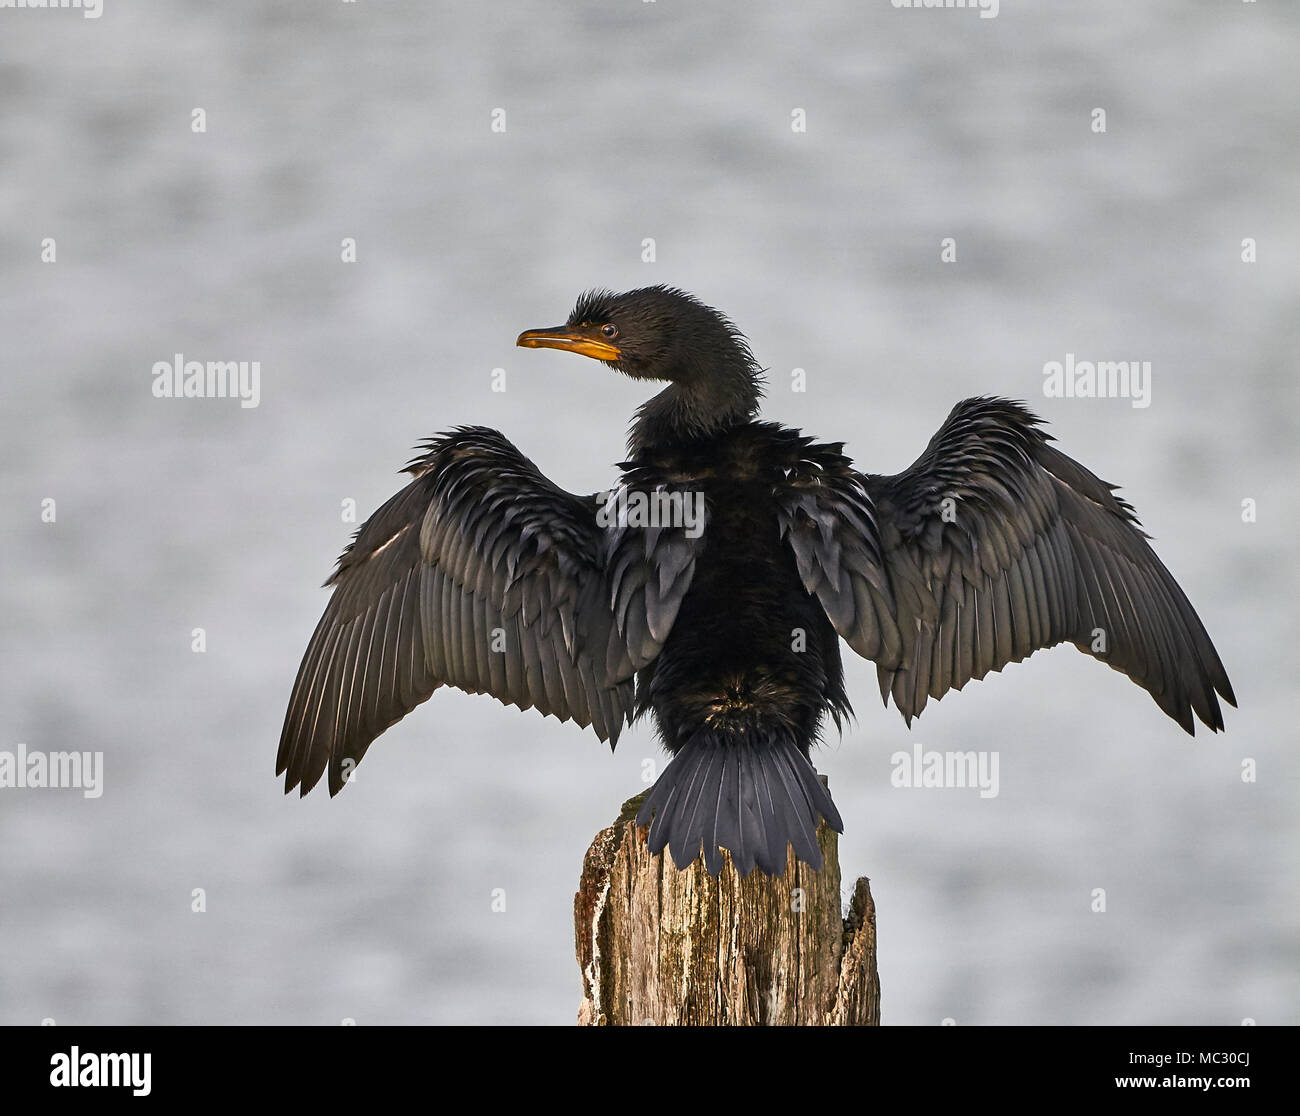 A Cormorant or Black Shag (Phalacrocorax Carbo) sitting on a post drying its wings by extending them in the sunlight with water in the background Stock Photo